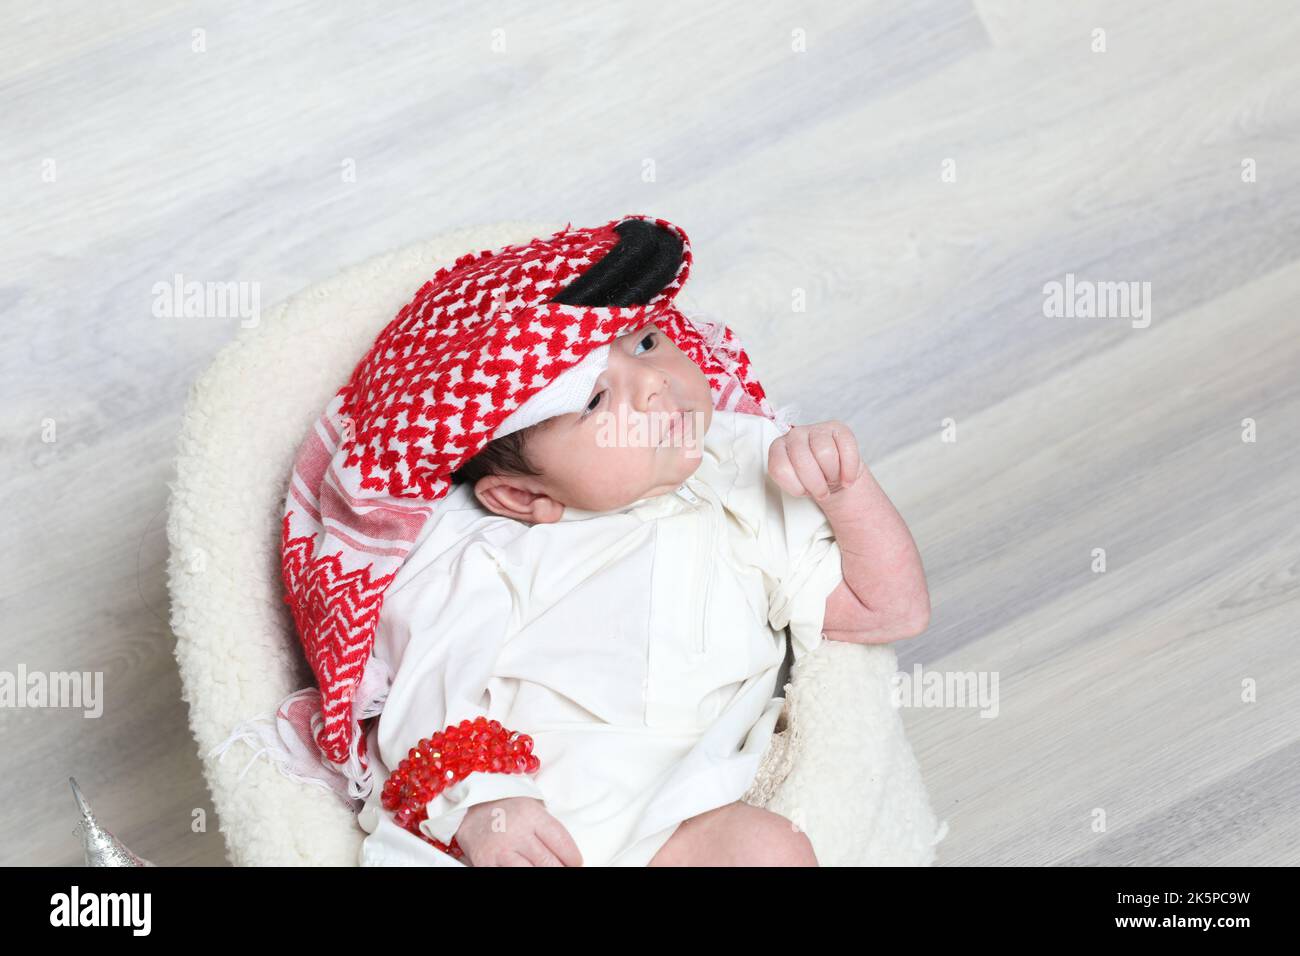 Saudi Muslim 1 month newborn boy in traditional arabian dressing white thobe red shemagh black agal sitting on little soft chair cultural tiny shoes Stock Photo